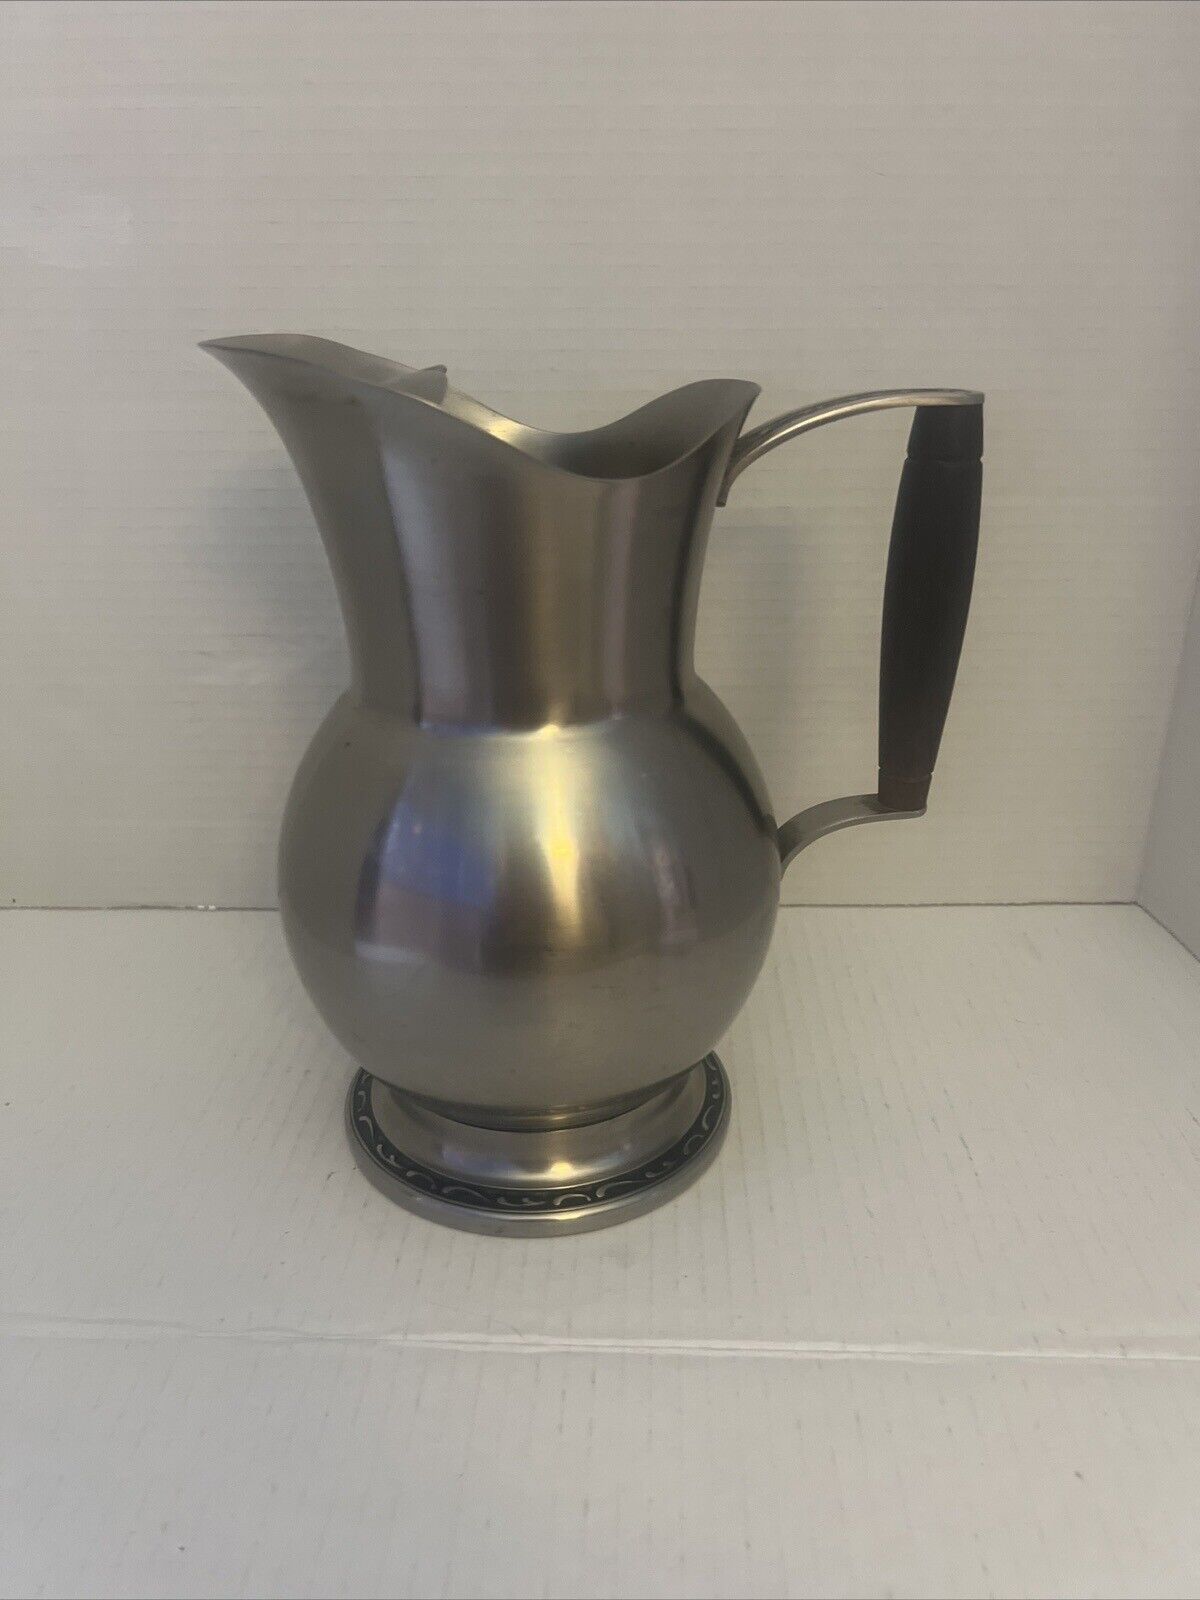 VTG Oneida Stainless Steel Pitcher 2.5 Qt Capacity With Ice Guard Wooden Handle